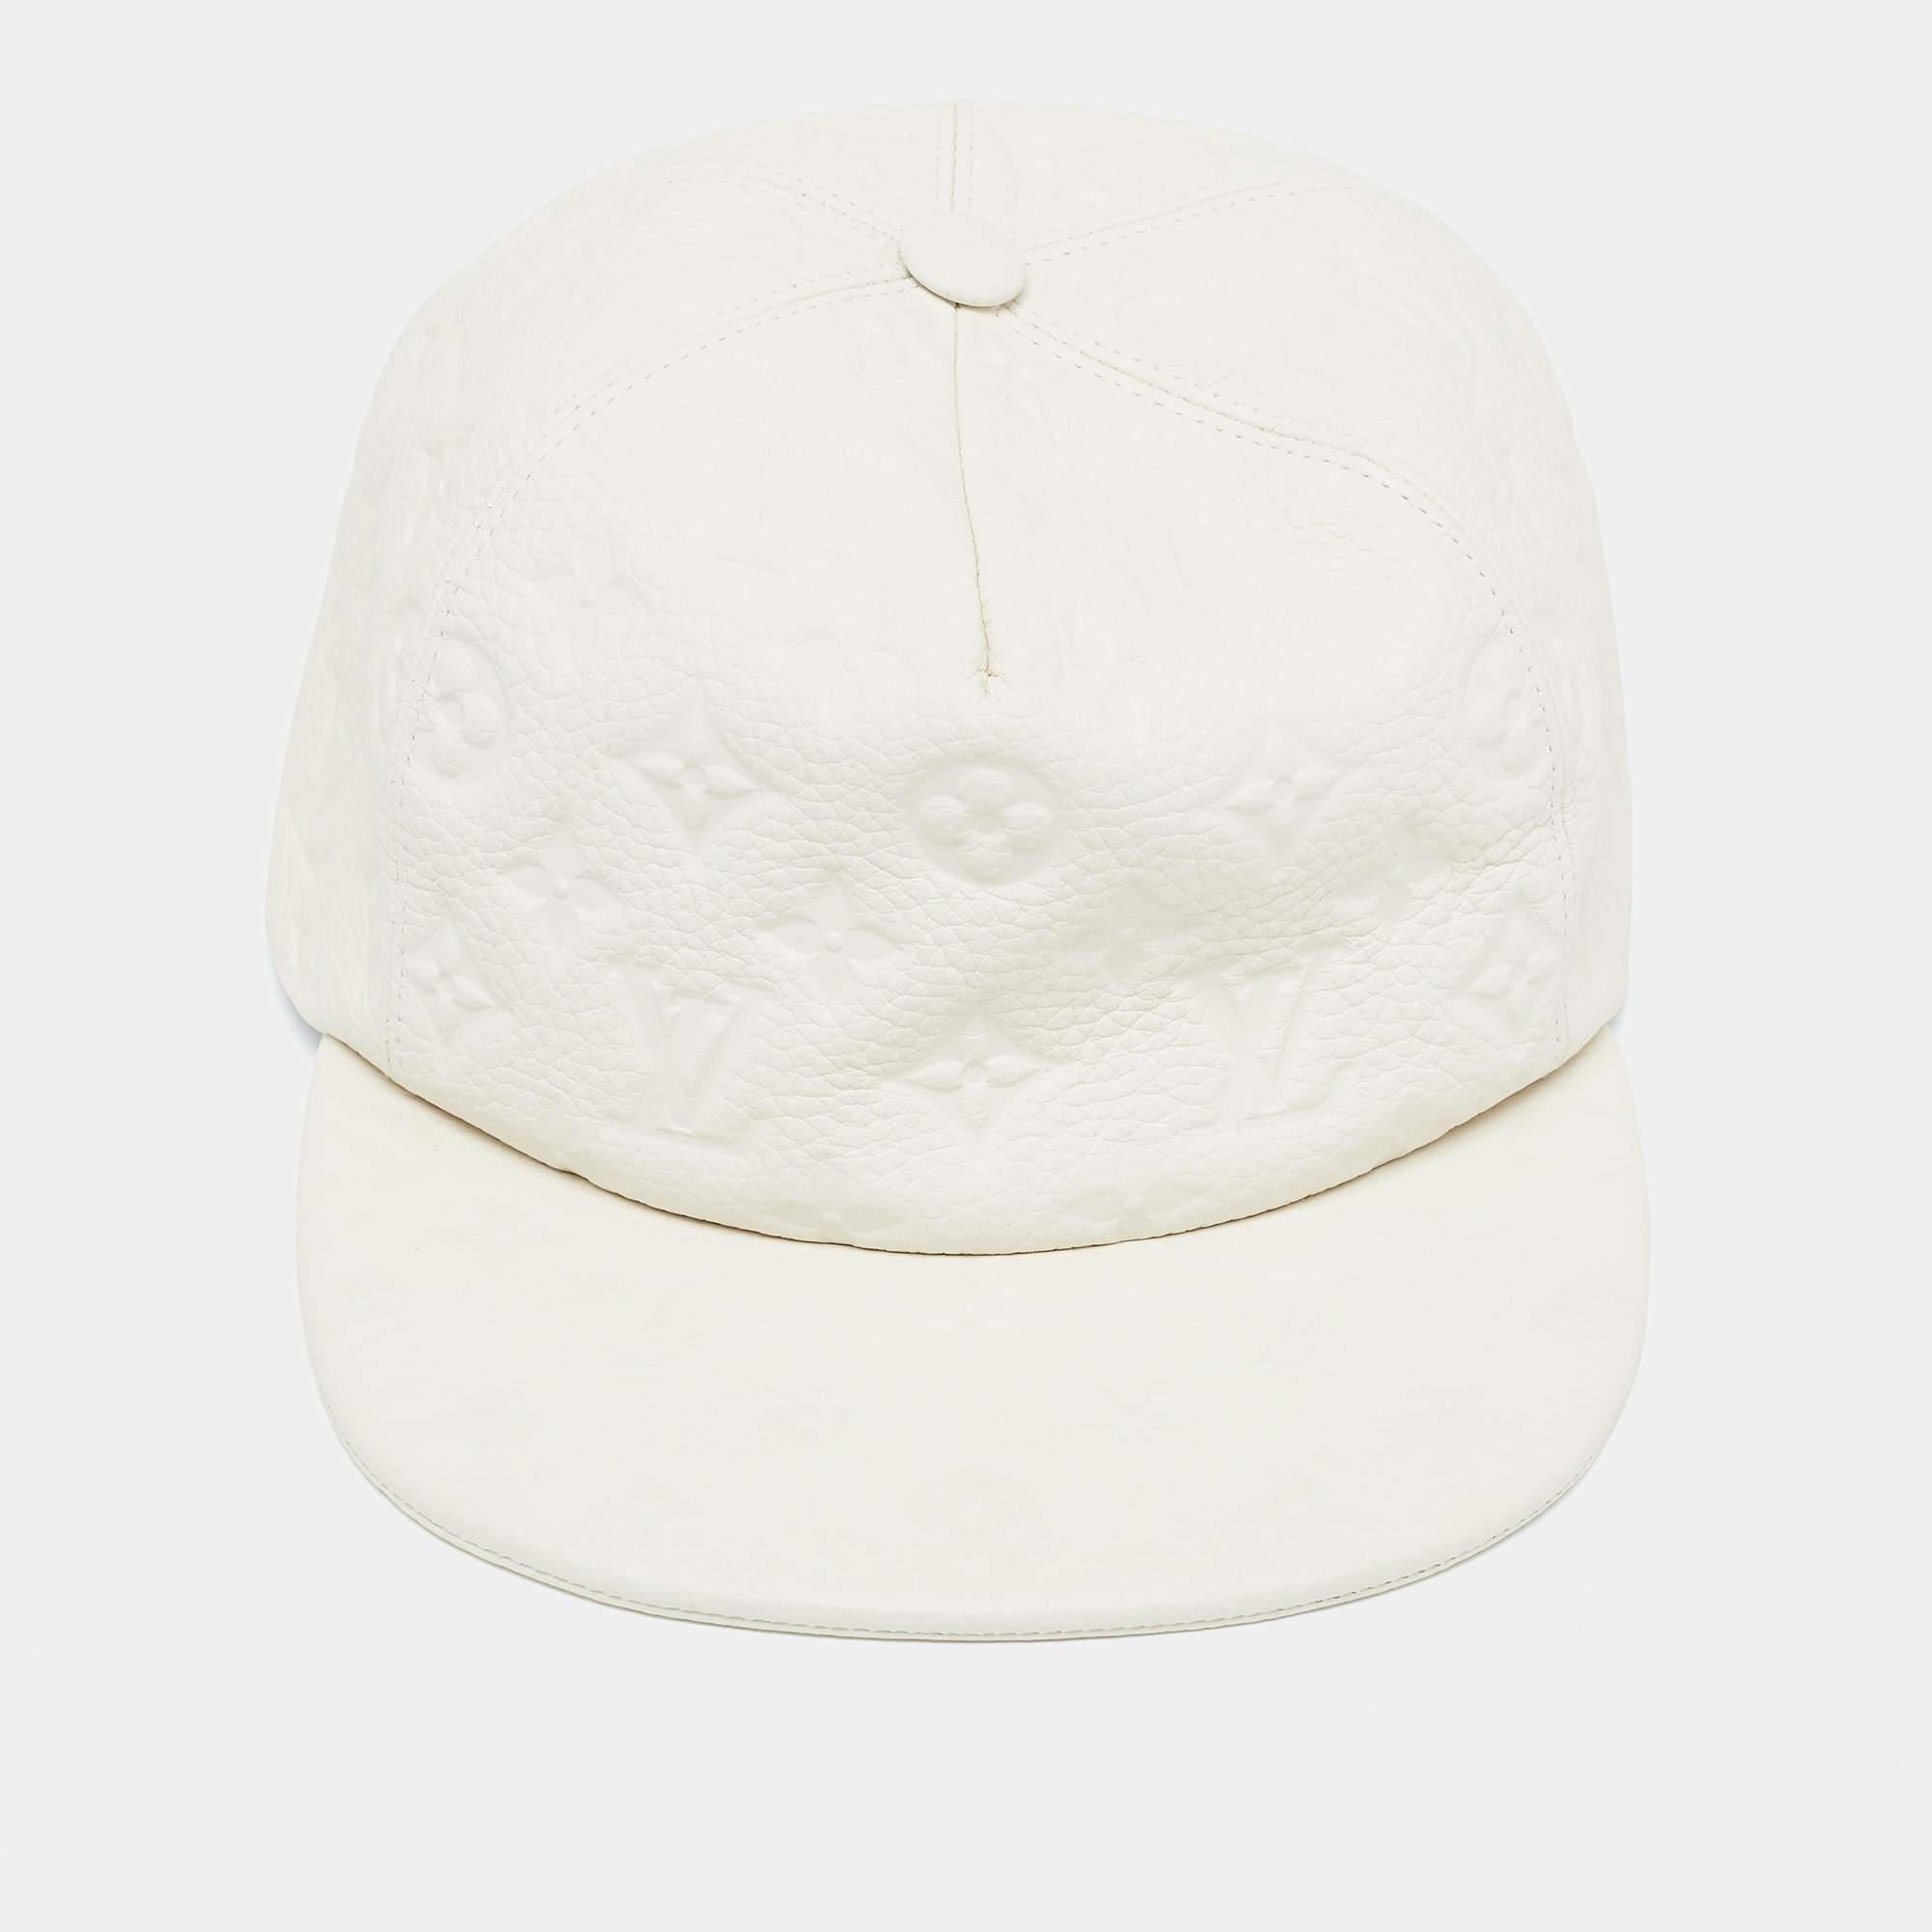 The Louis Vuitton X Virgil Abloh Limited Edition baseball cap is a stylish accessory featuring the iconic LV monogram pattern. Designed by Virgil Abloh, it boasts a modern aesthetic with a quill emblem, combining luxury fashion with streetwear